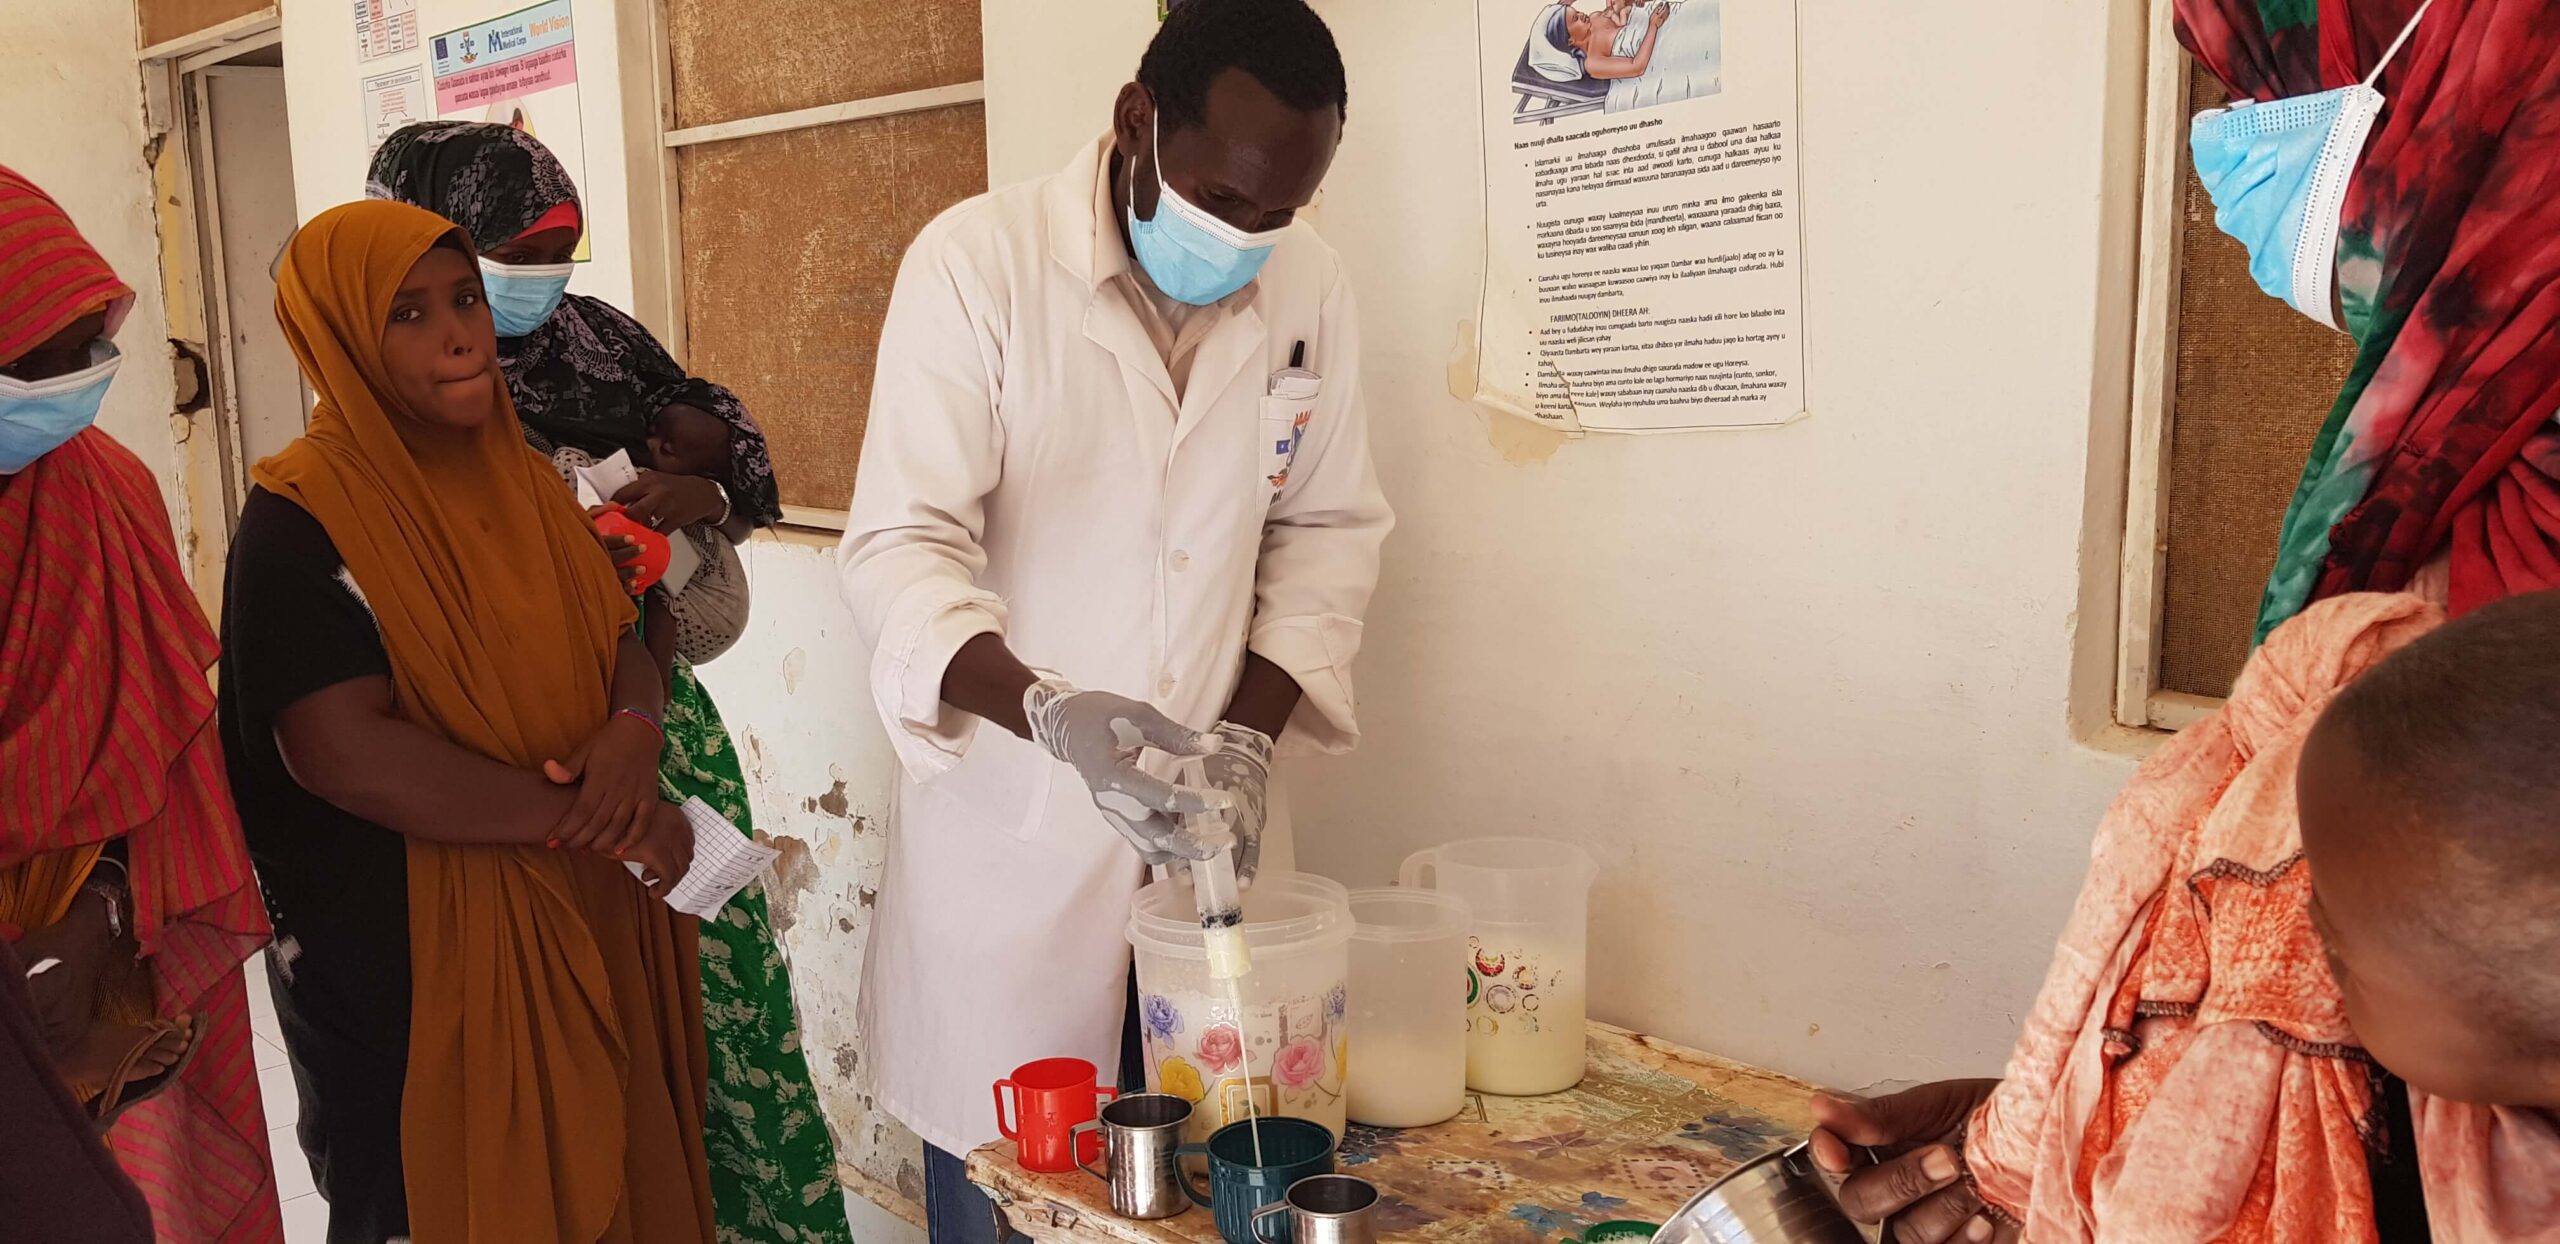 Our team at the Galkacyo Hospital is distributing lifesaving medical supplies